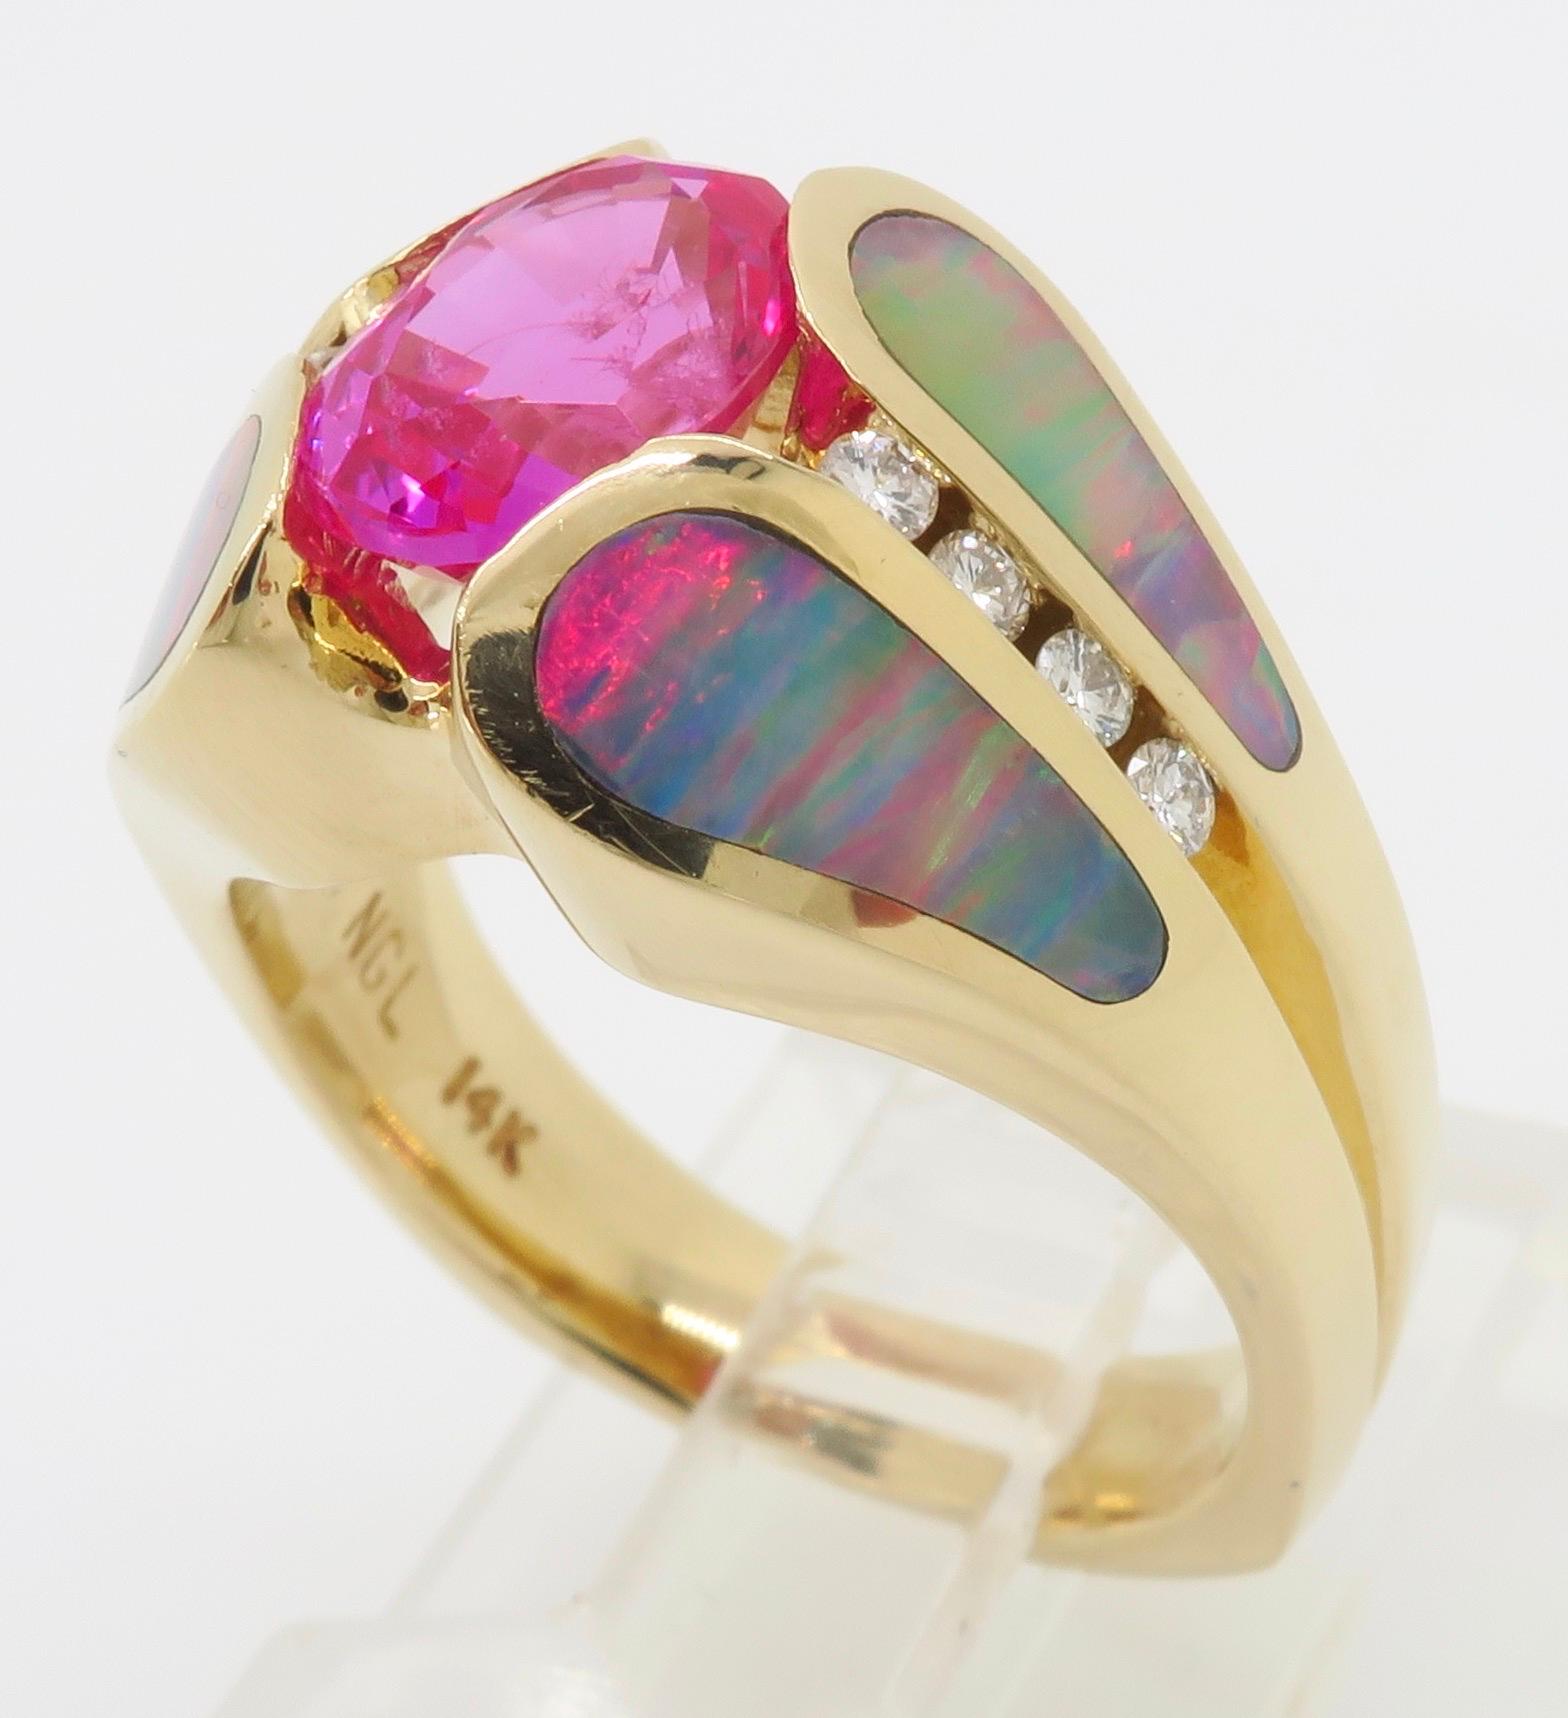 Pink Sapphire Diamond and Opal Ring Made in 14 Karat Yellow Gold 4